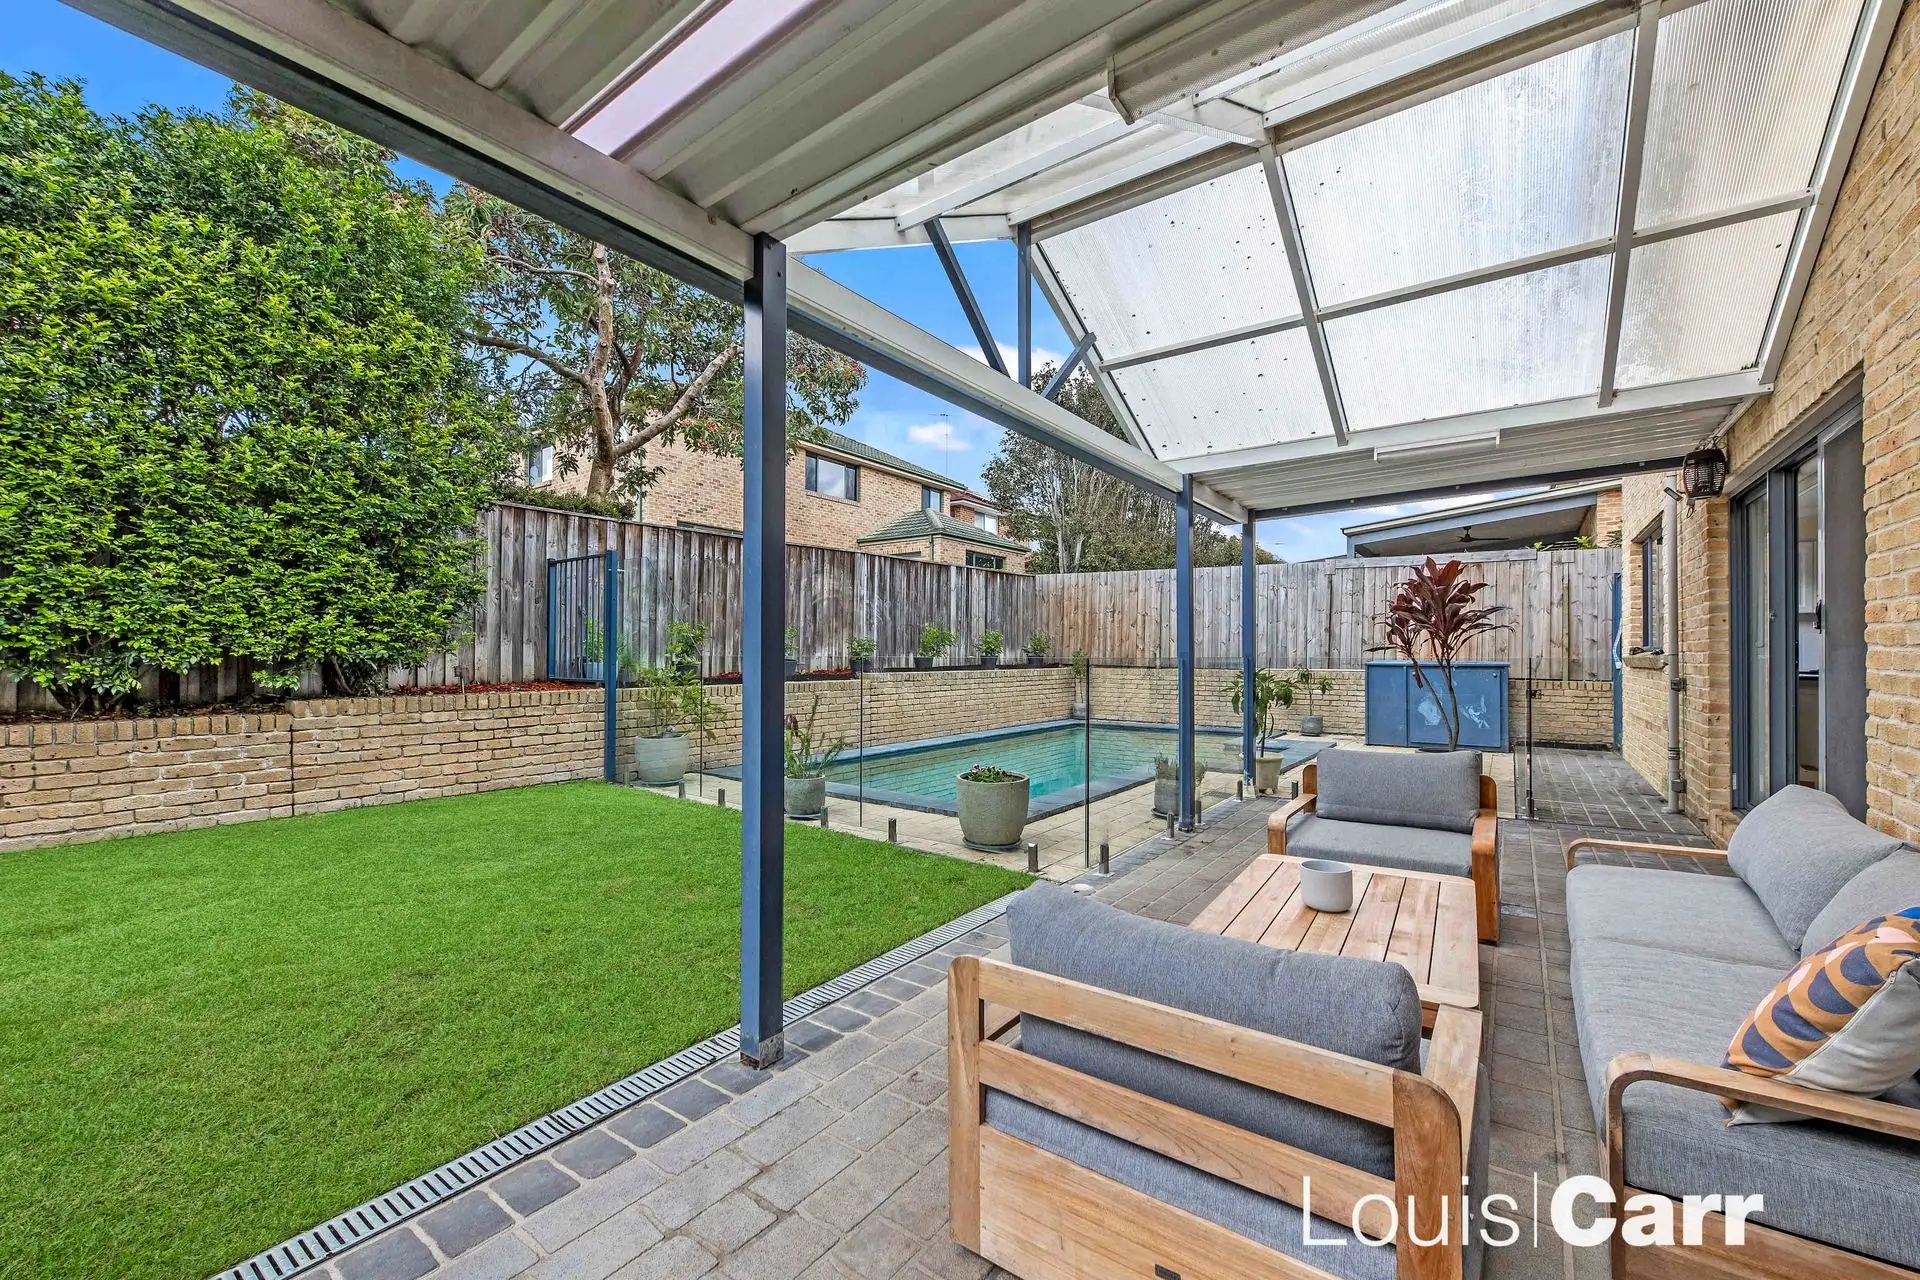 Photo #13: 23 Queensbury Avenue, Kellyville - Sold by Louis Carr Real Estate